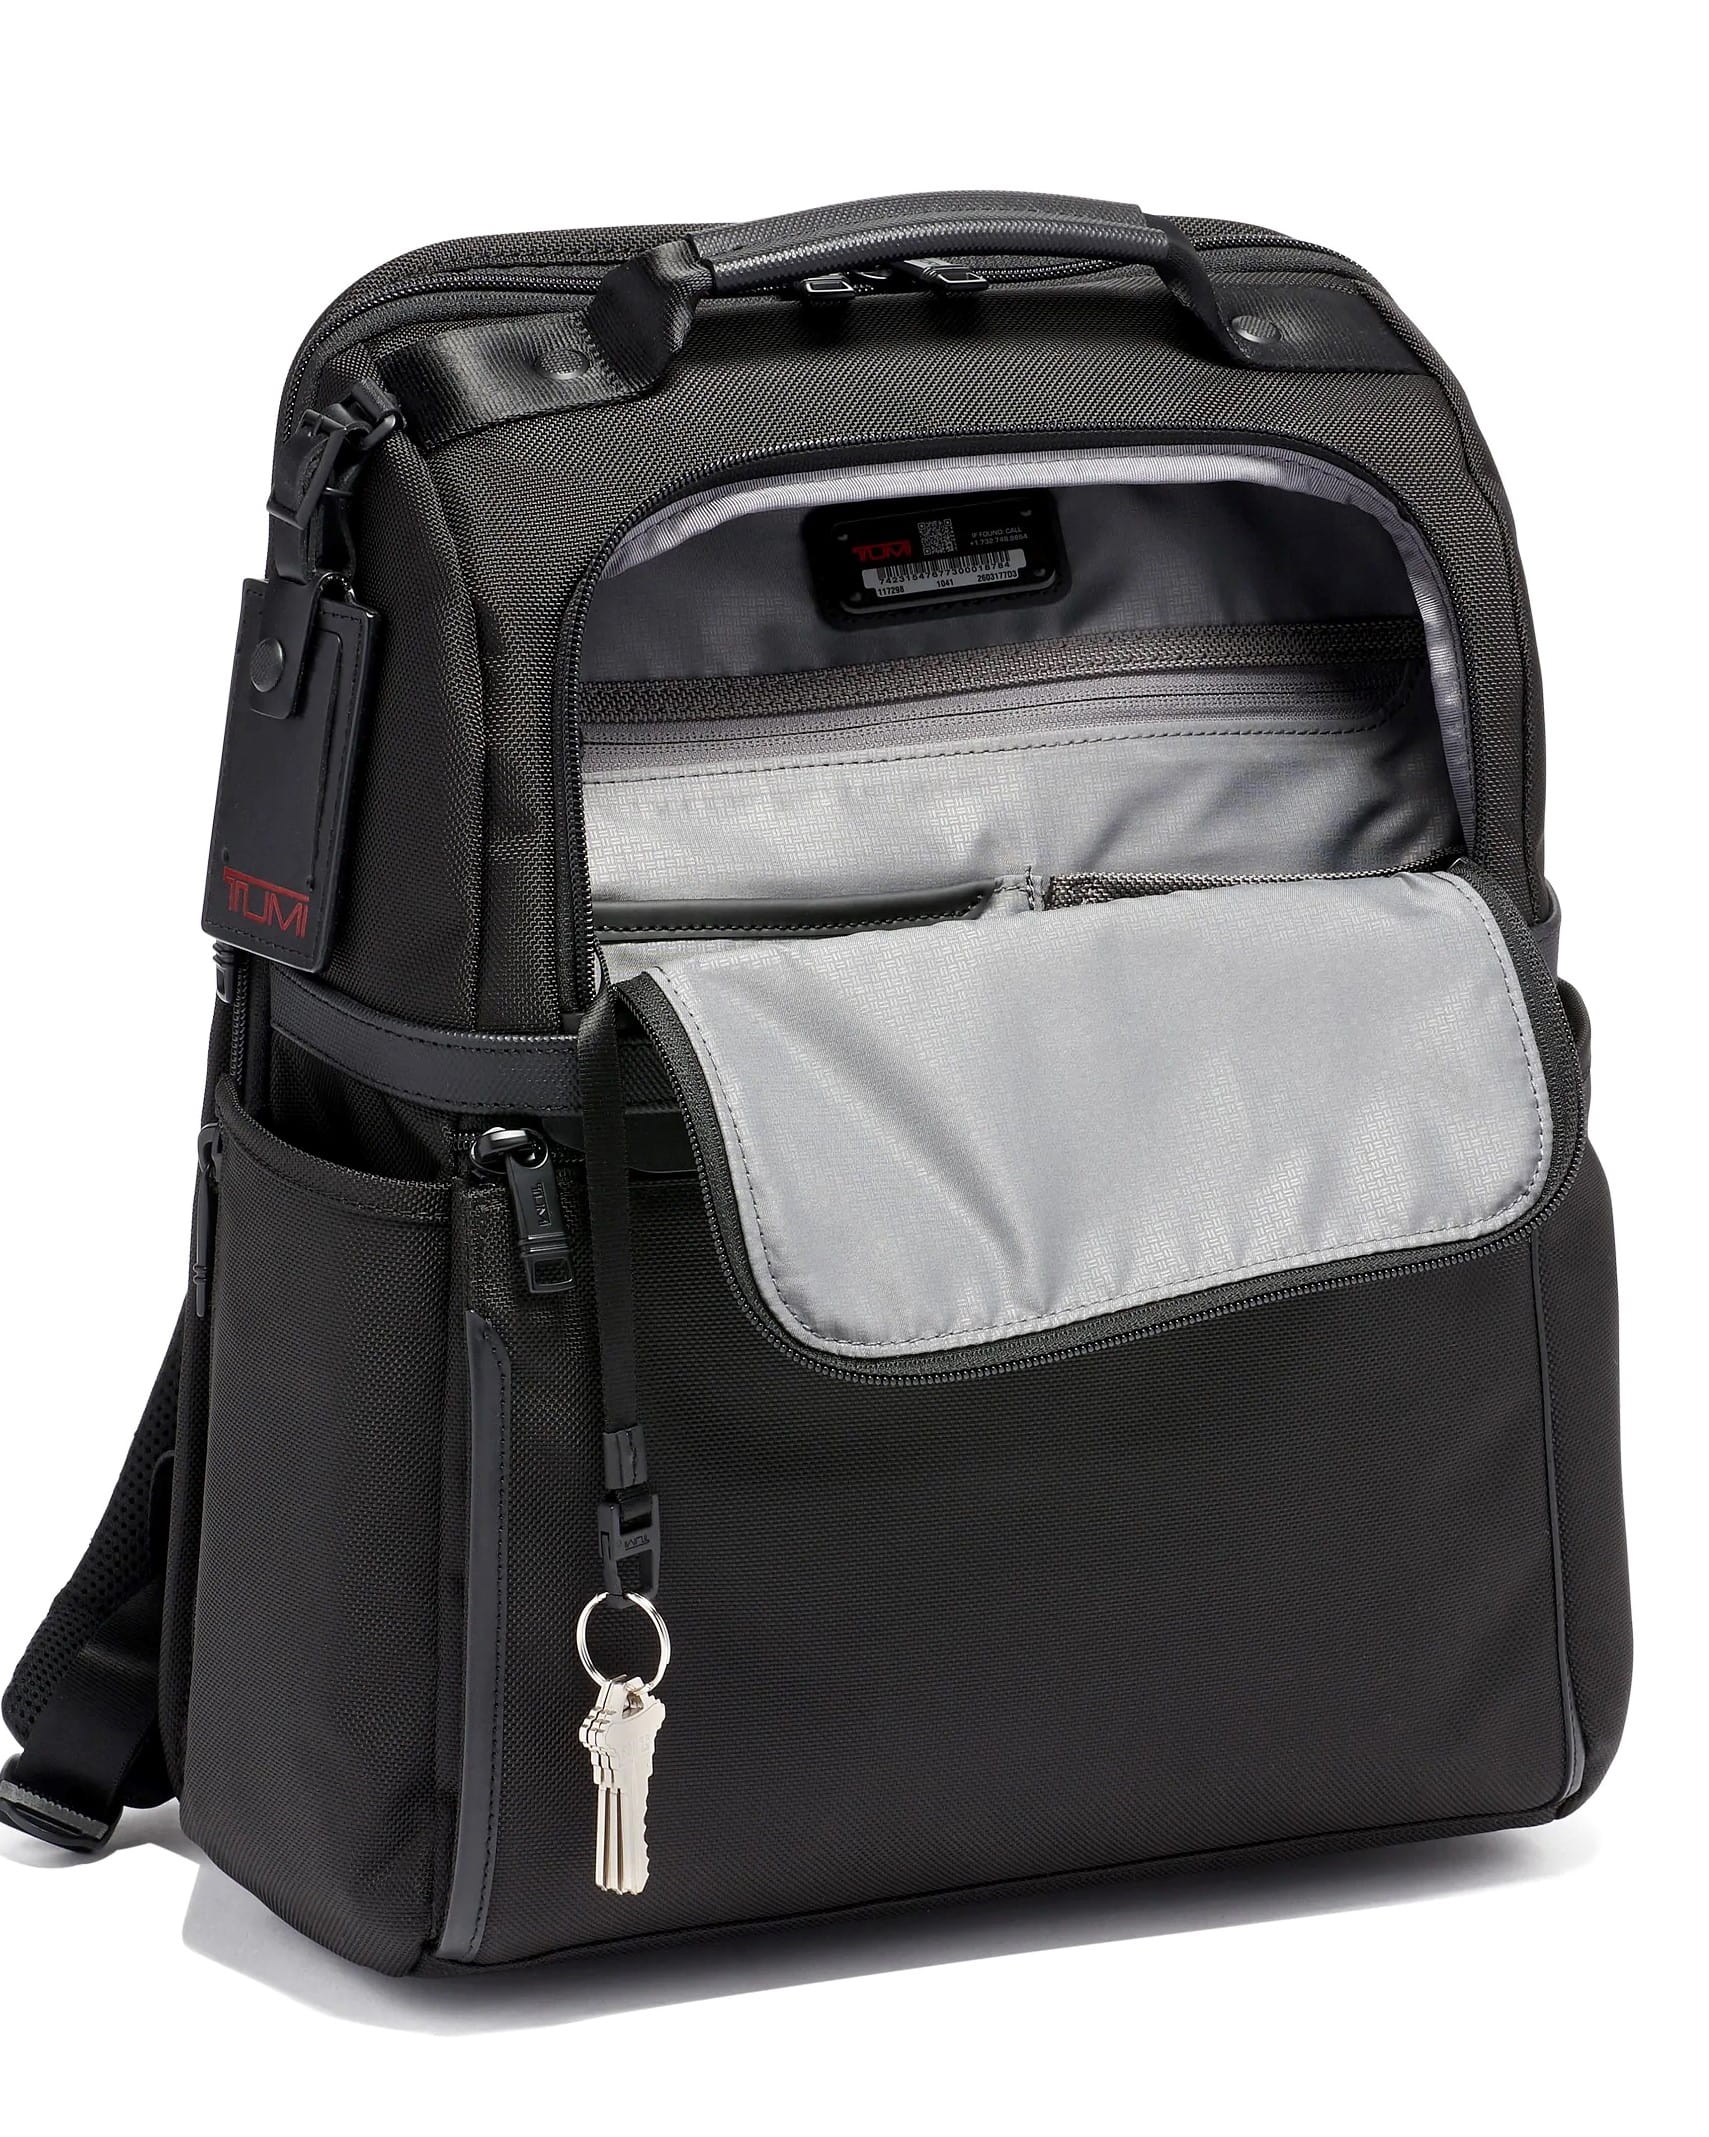 BALO UNISEX LAPTOP TUMI ALPHA SLIM SOLUTIONS BRIEF PACK BACKPACK 9